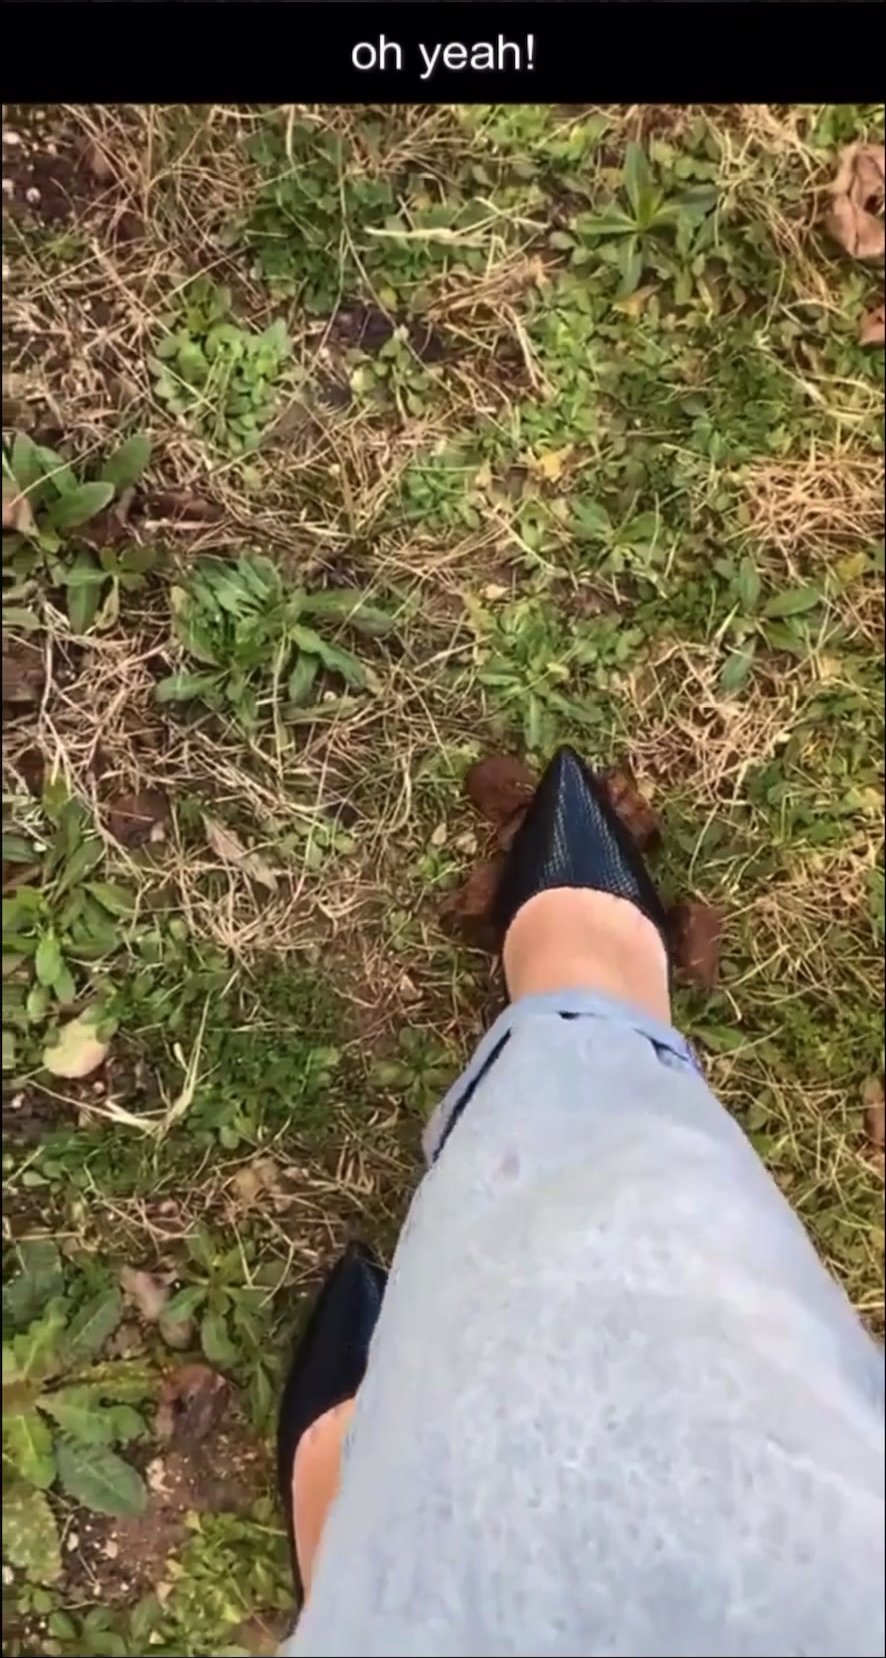 French girl stepping in poo